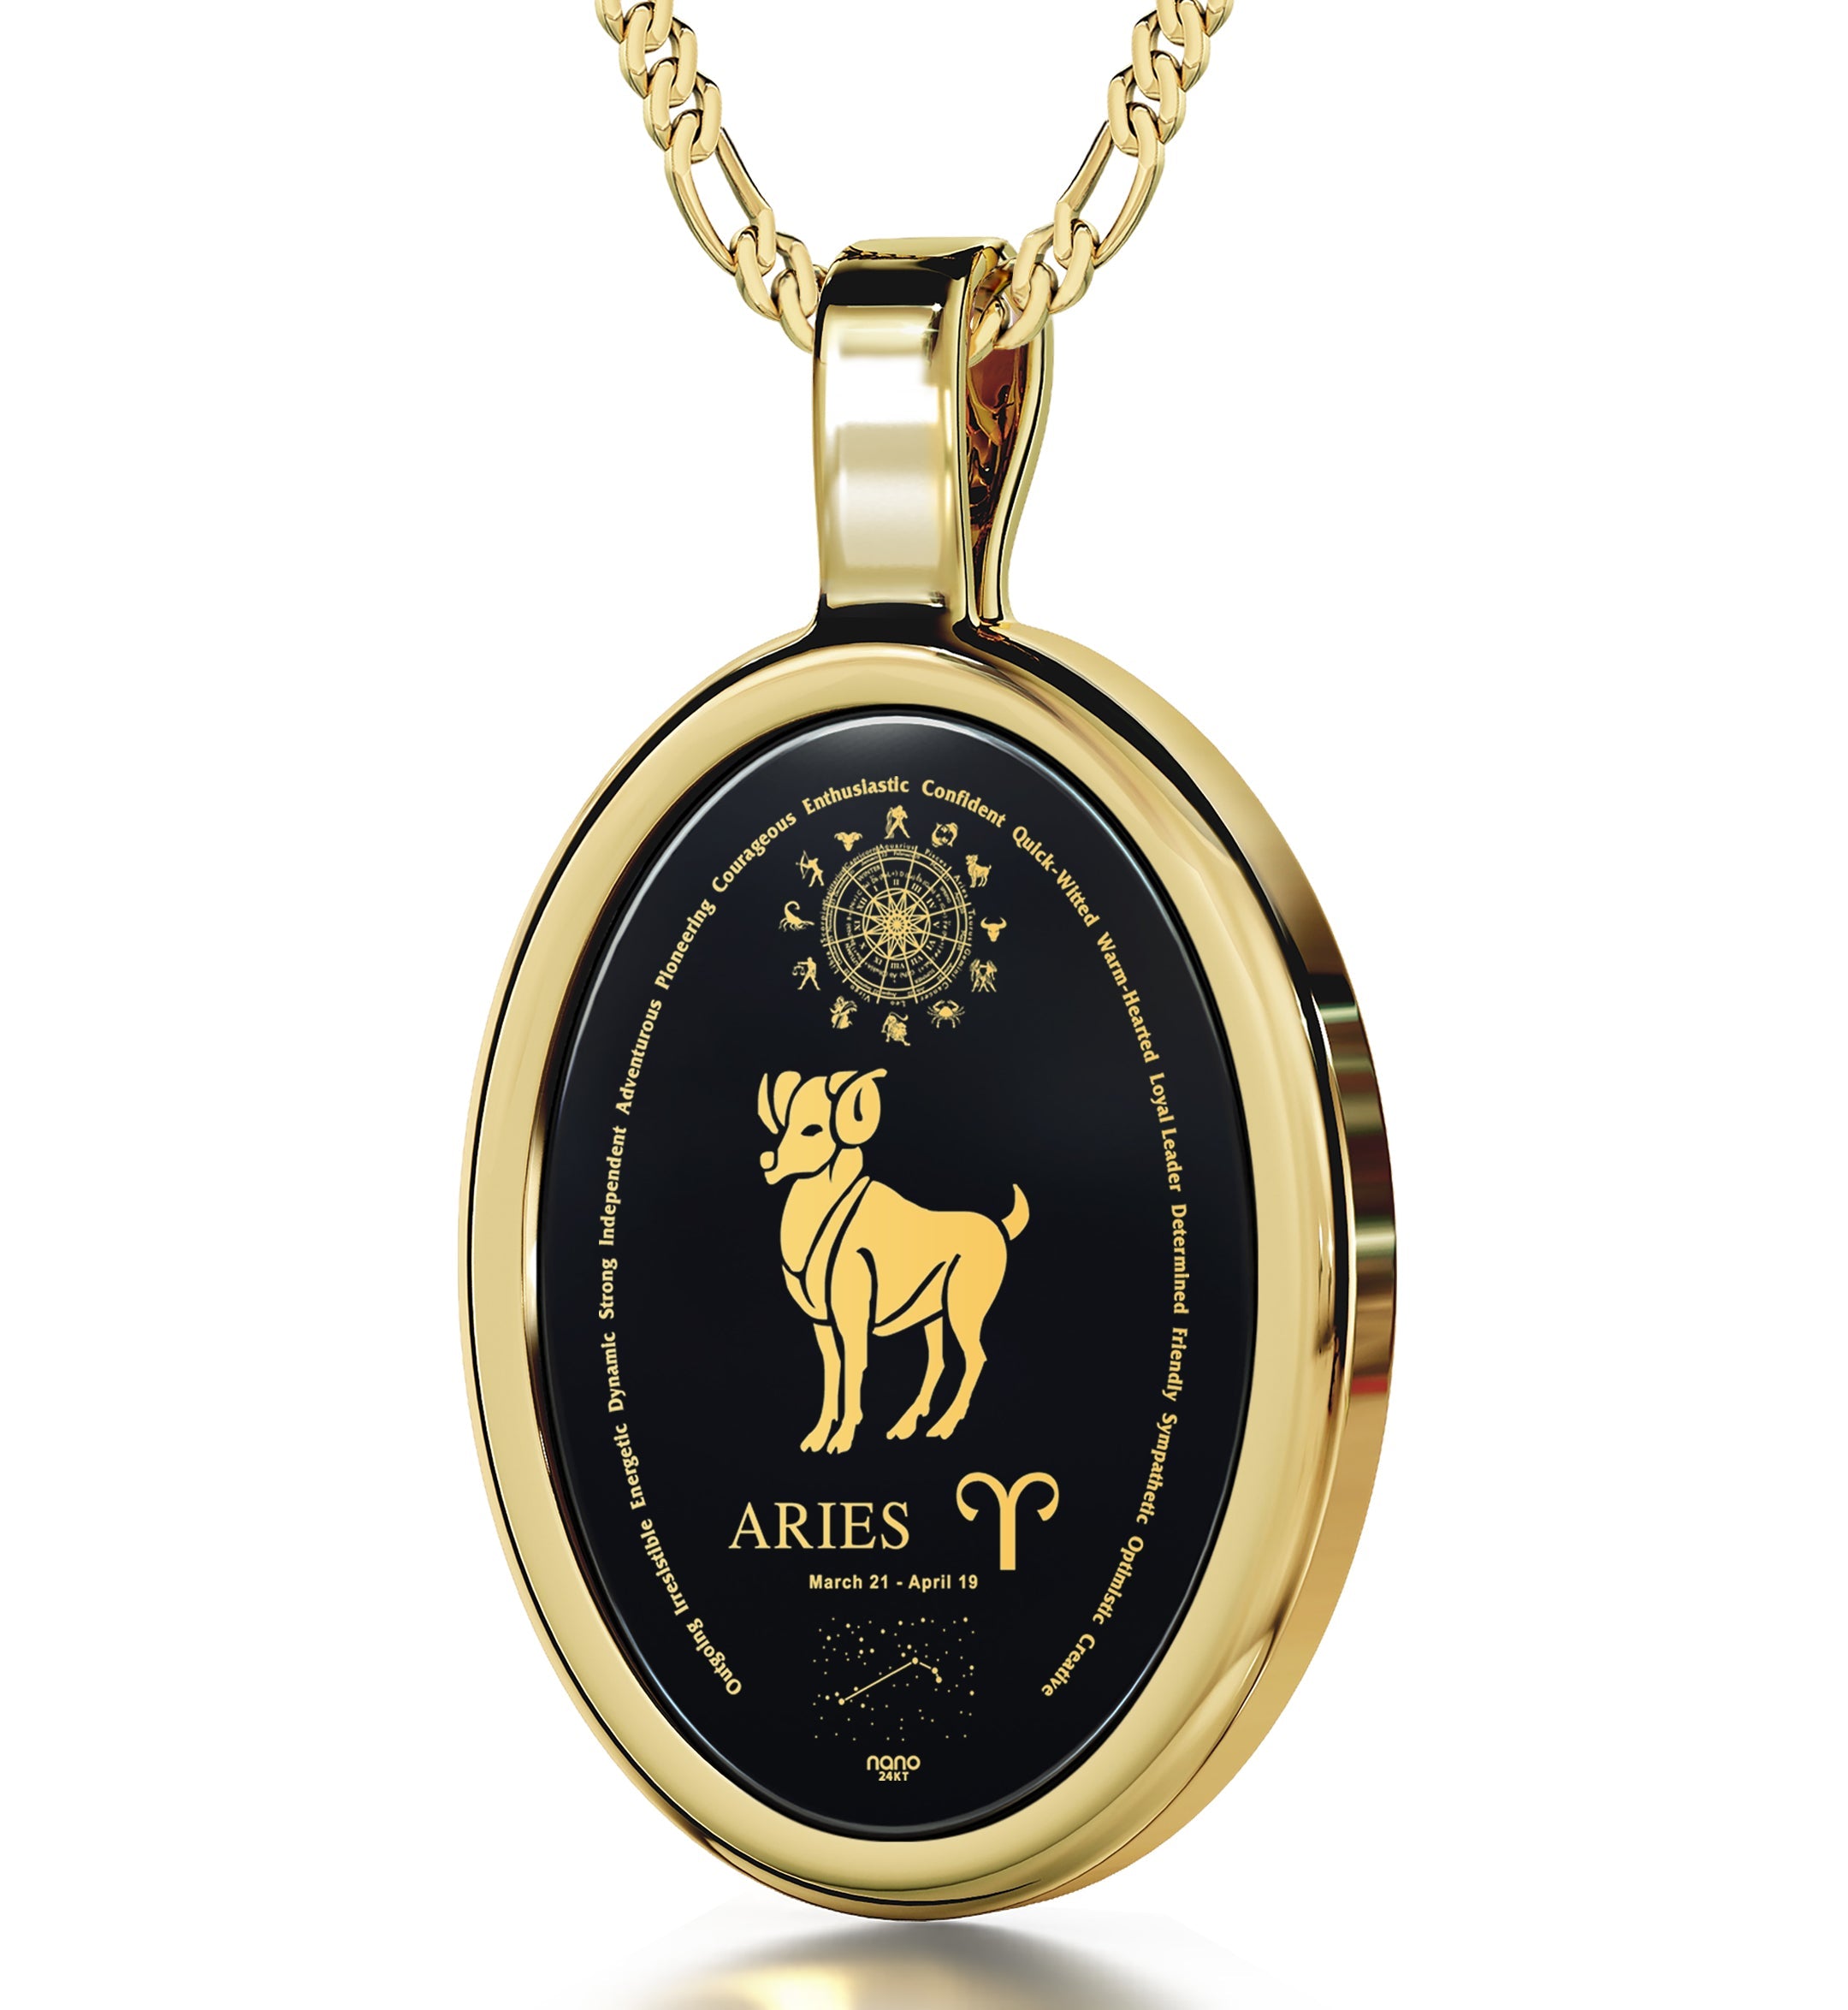 Round decorative pendant featuring the Aries Necklace Zodiac Pendant 24k Gold Inscribed on Onyx Stone with a golden ram, astrological symbol, and traits on a black onyx background surrounded by a silver frame.